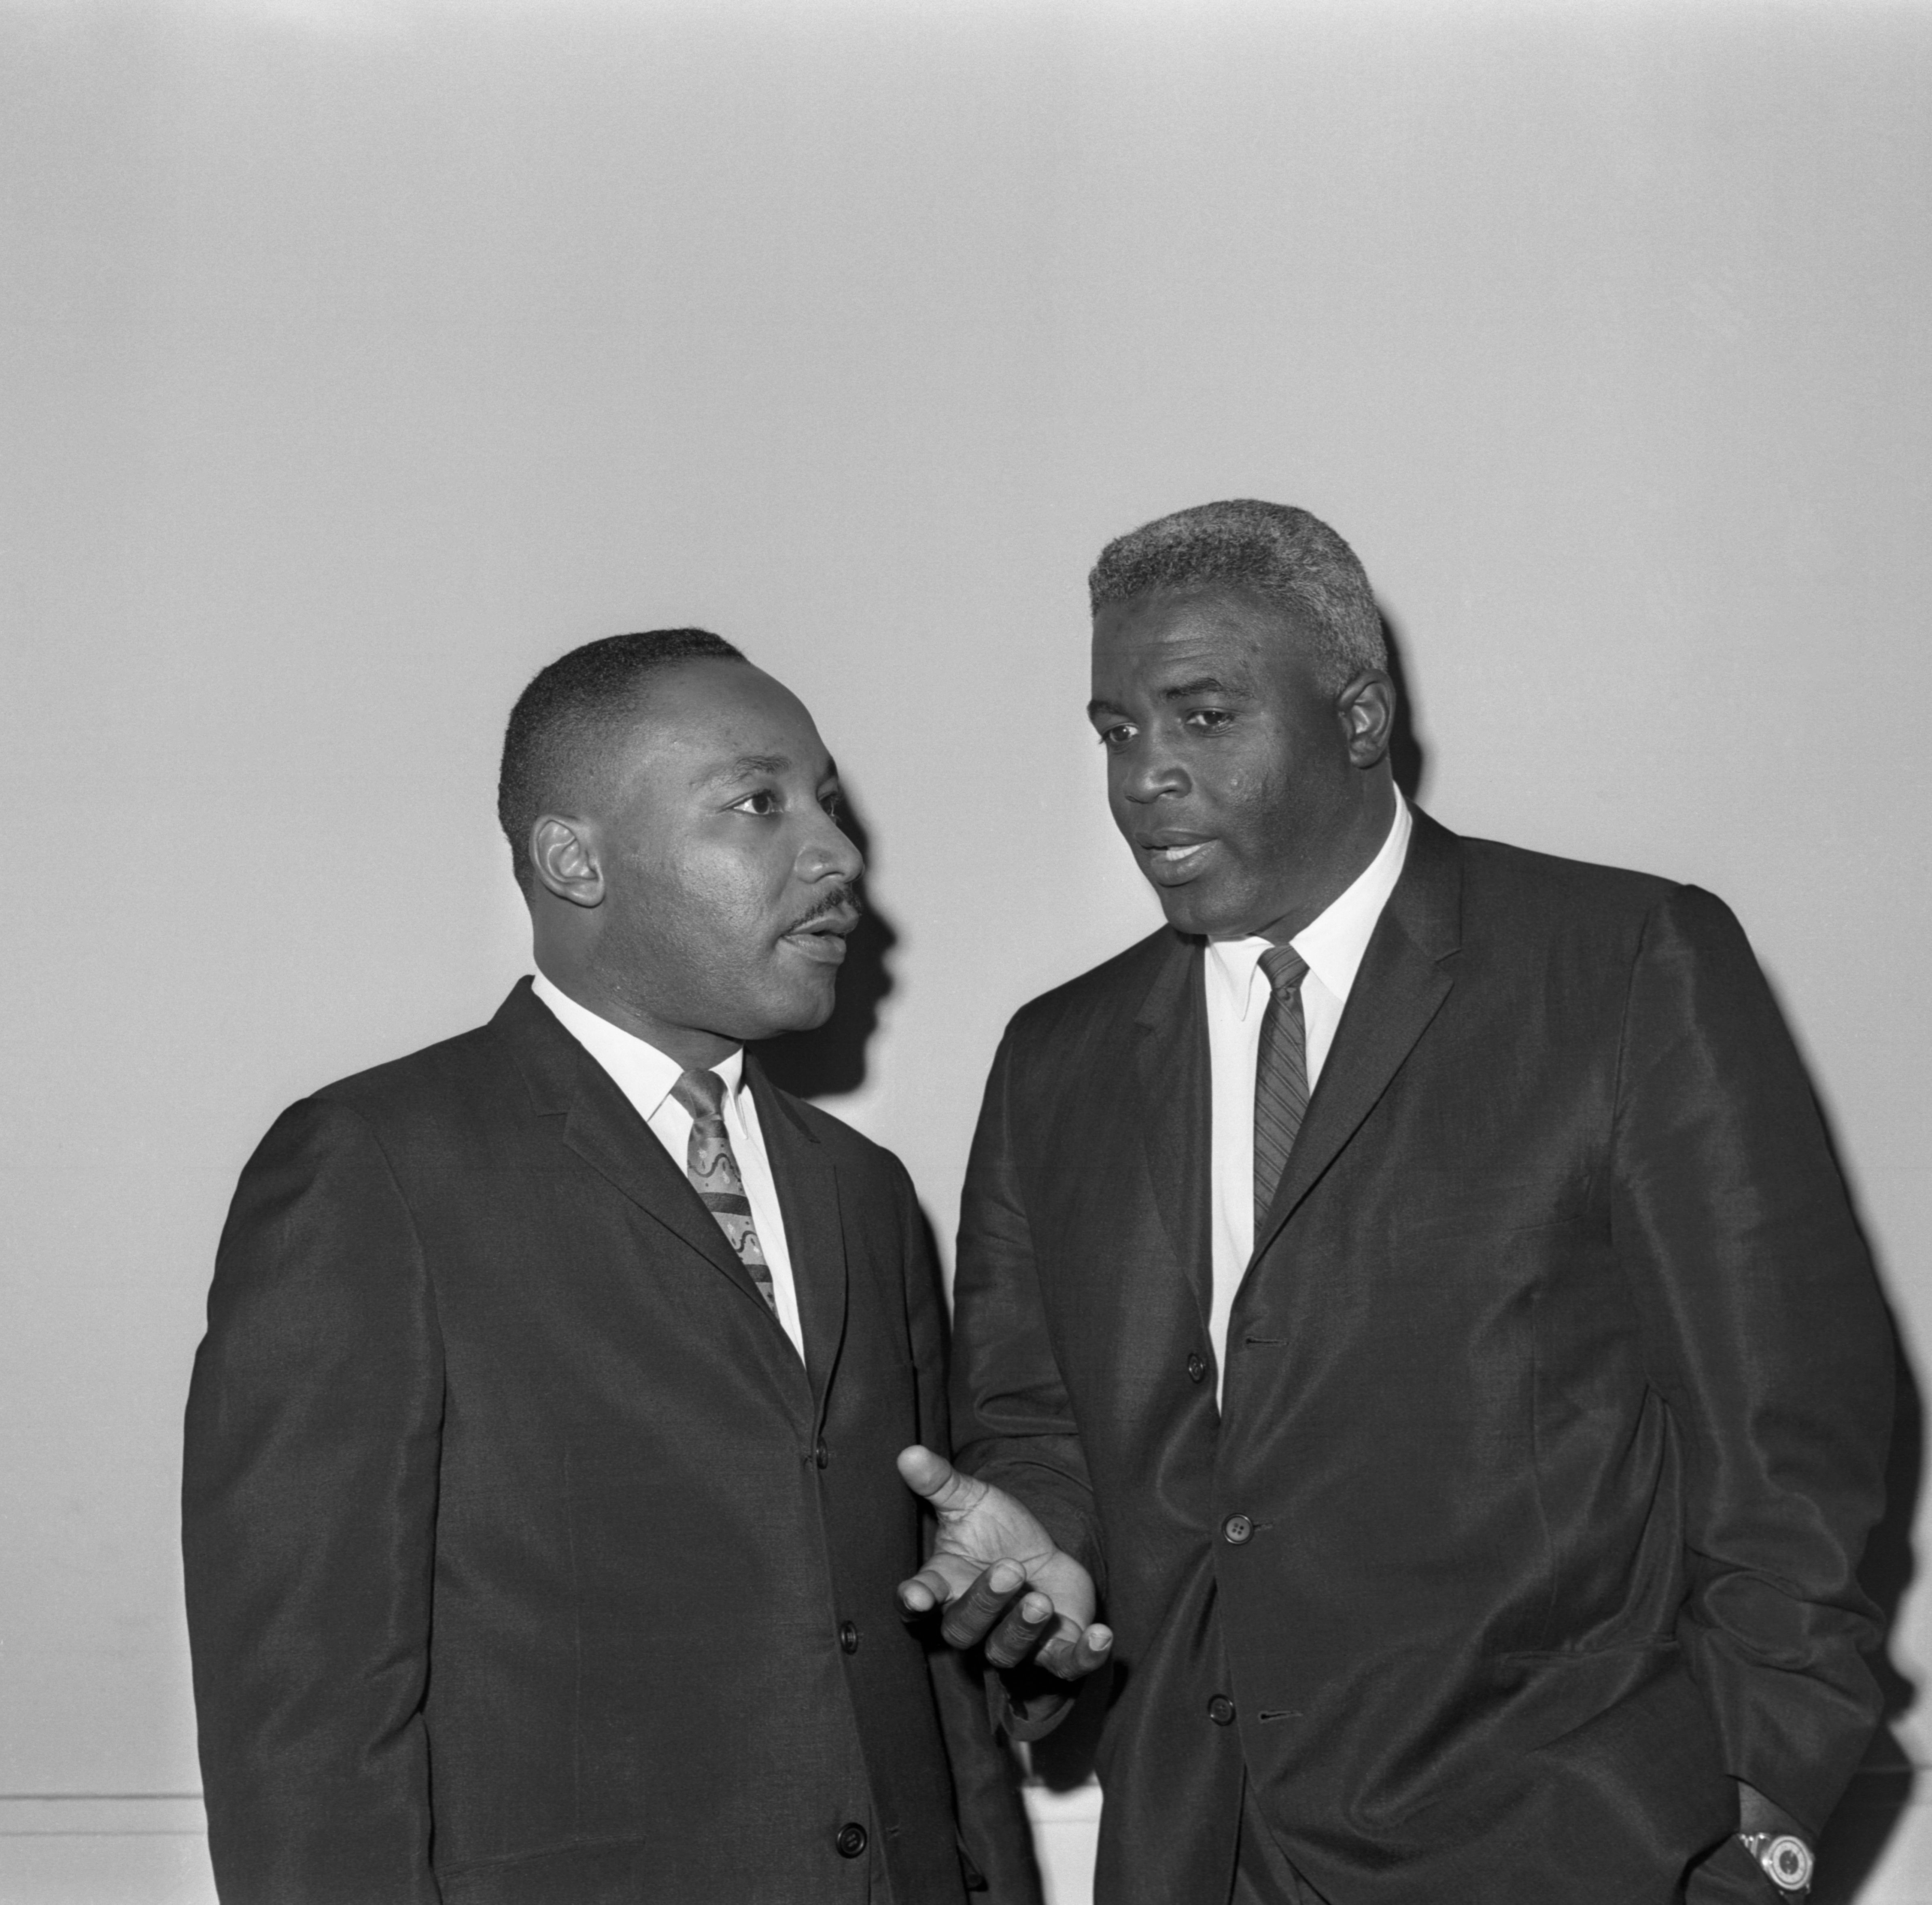 Martin Luther King Jr. in conversation with Jackie Robinson  in 1962.